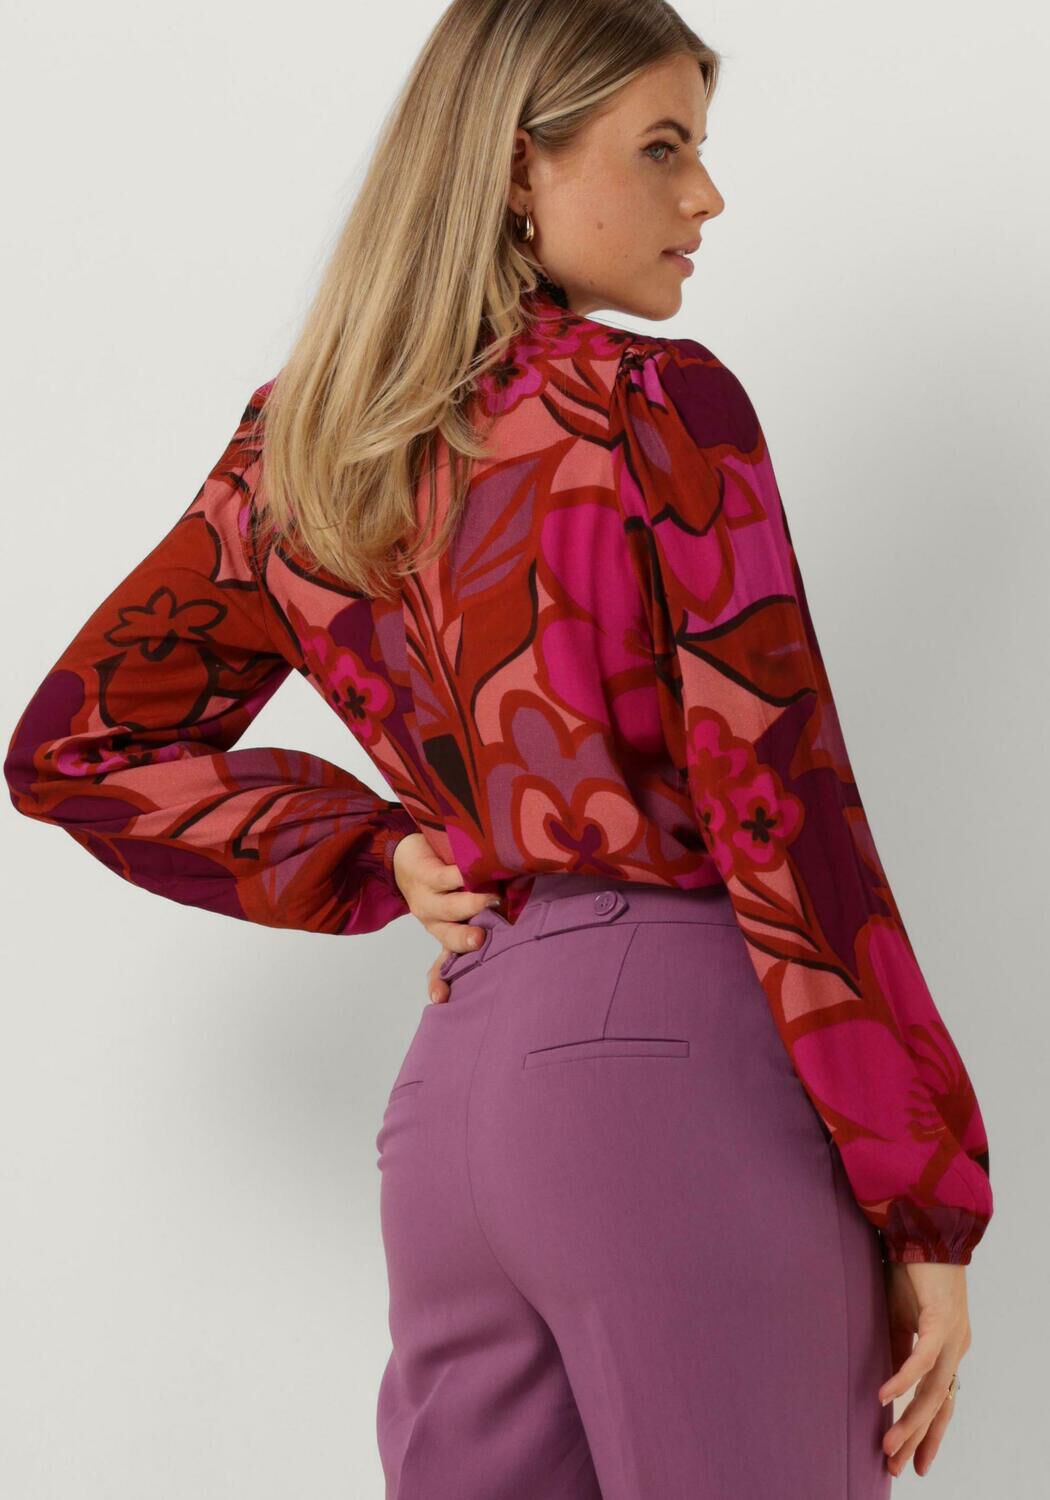 JANSEN AMSTERDAM Dames Blouses Wfp105 Blouse Print With Puffsleeves And Turtle Neck Roze